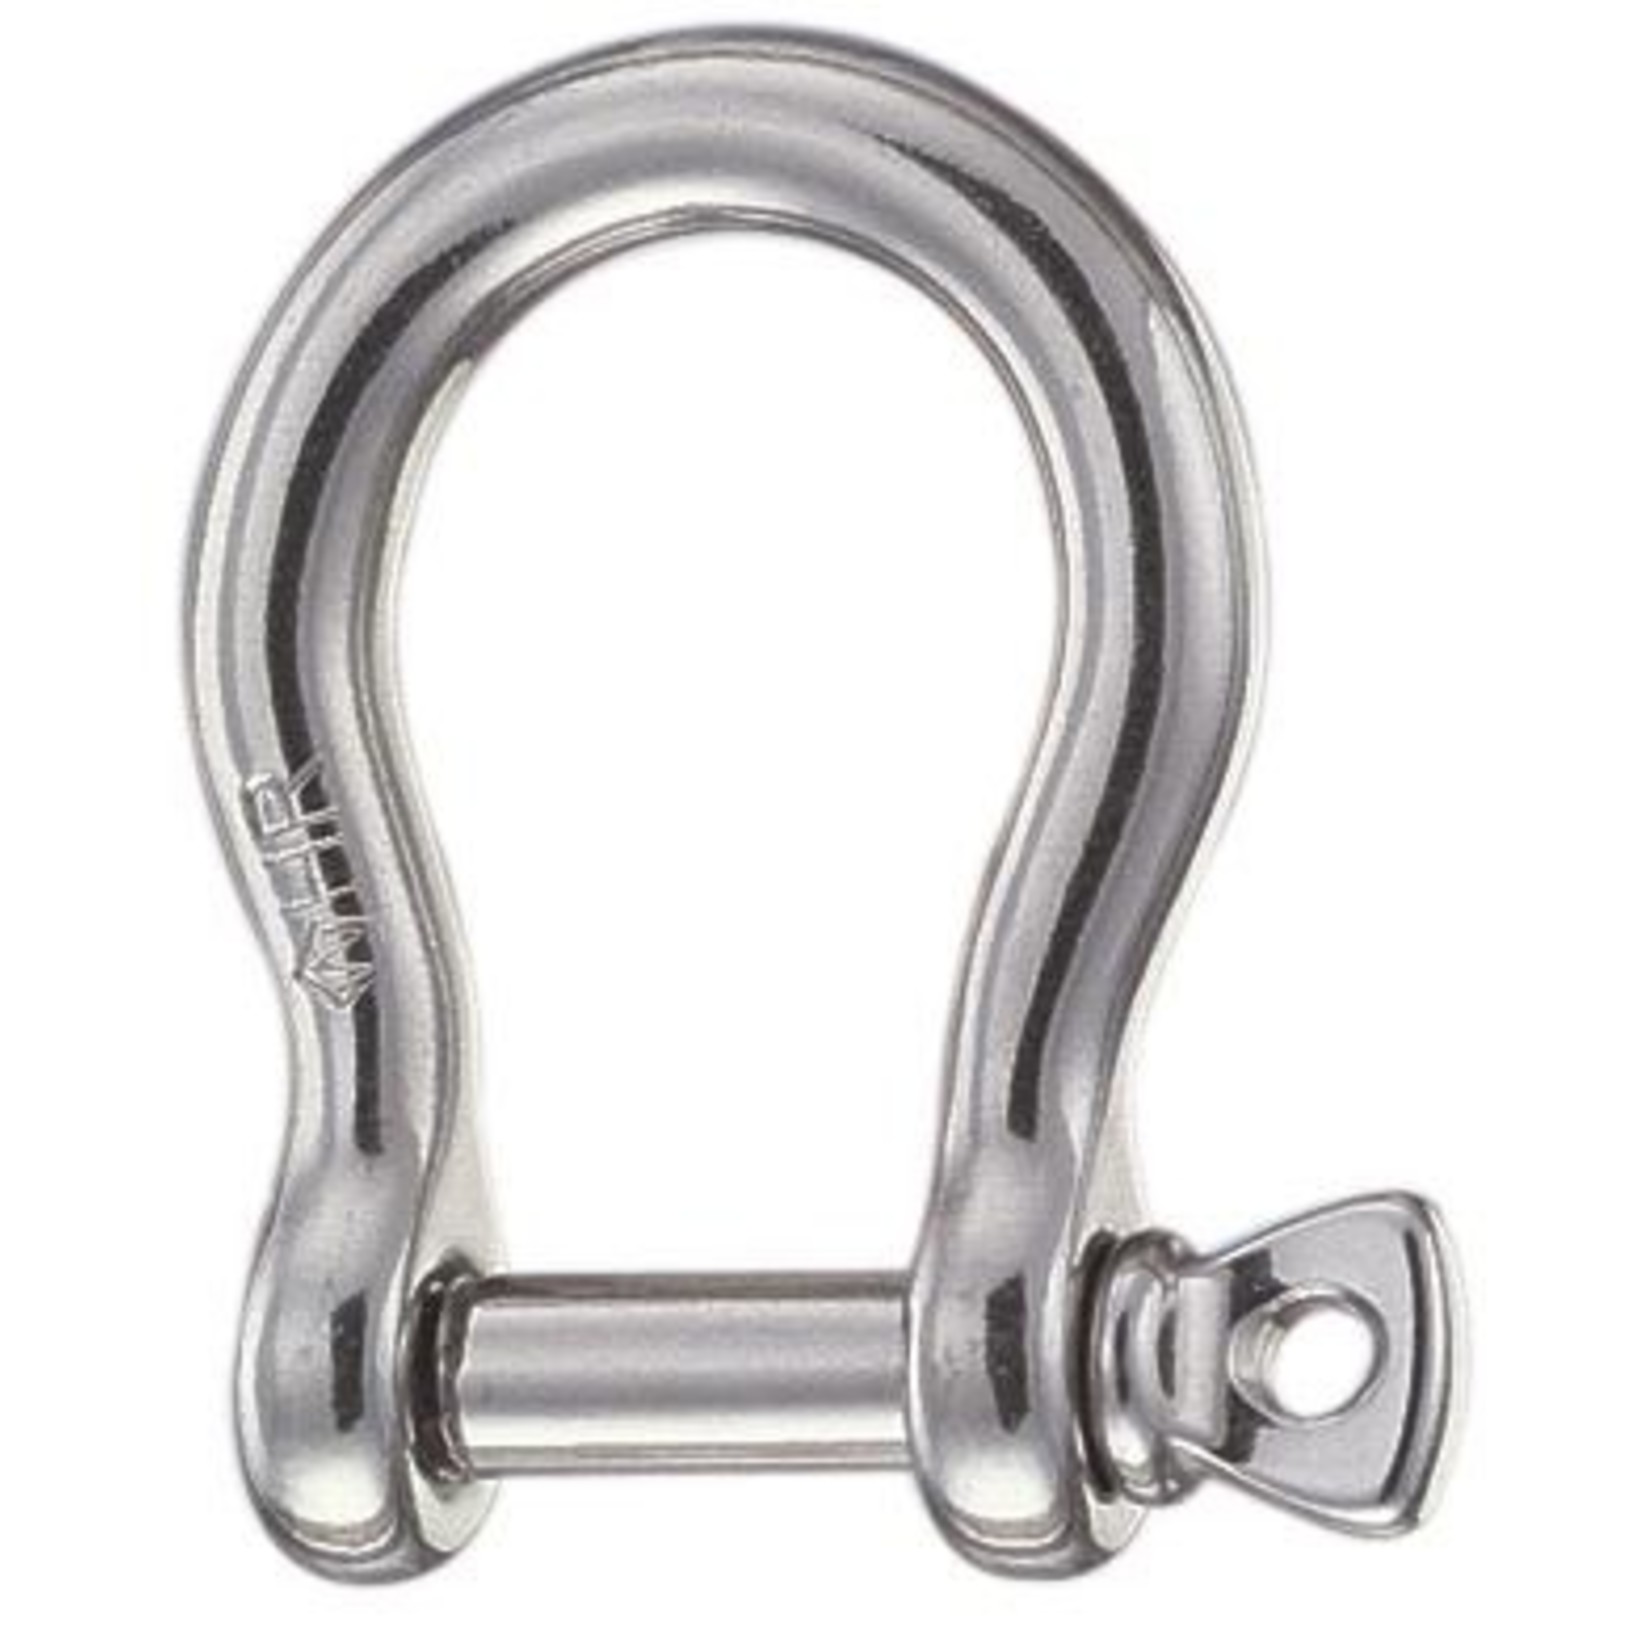 Wichard HR bow shackle - Dia 24 mm